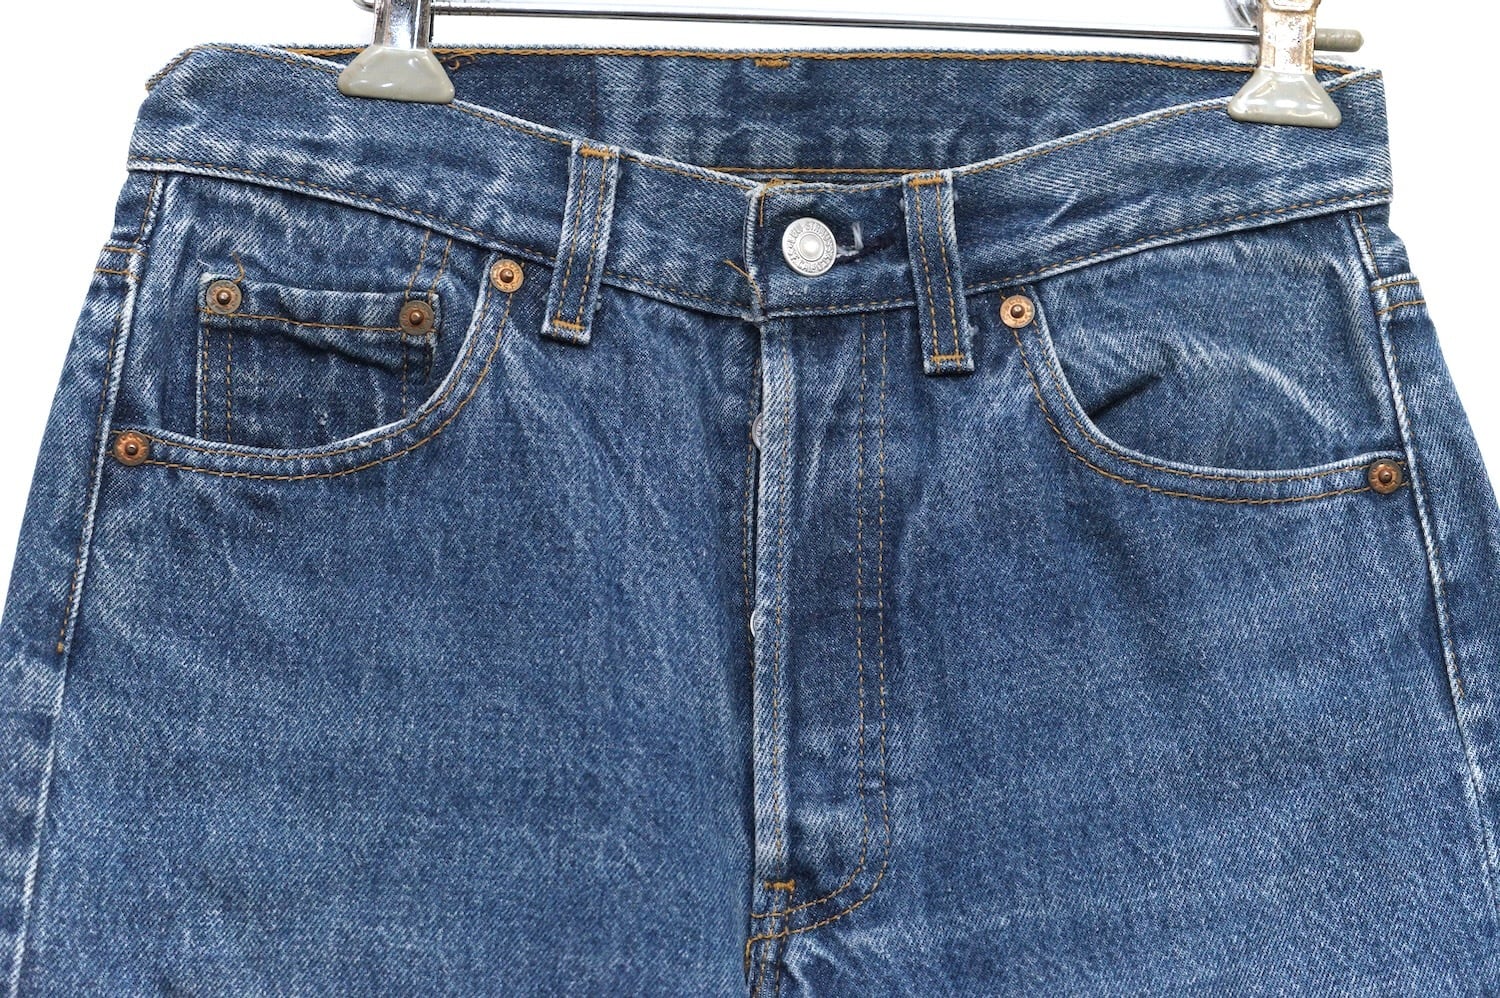 2638 LEVI'S リーバイス 501 W29 L31 Made In USA アメリカ製 501工場